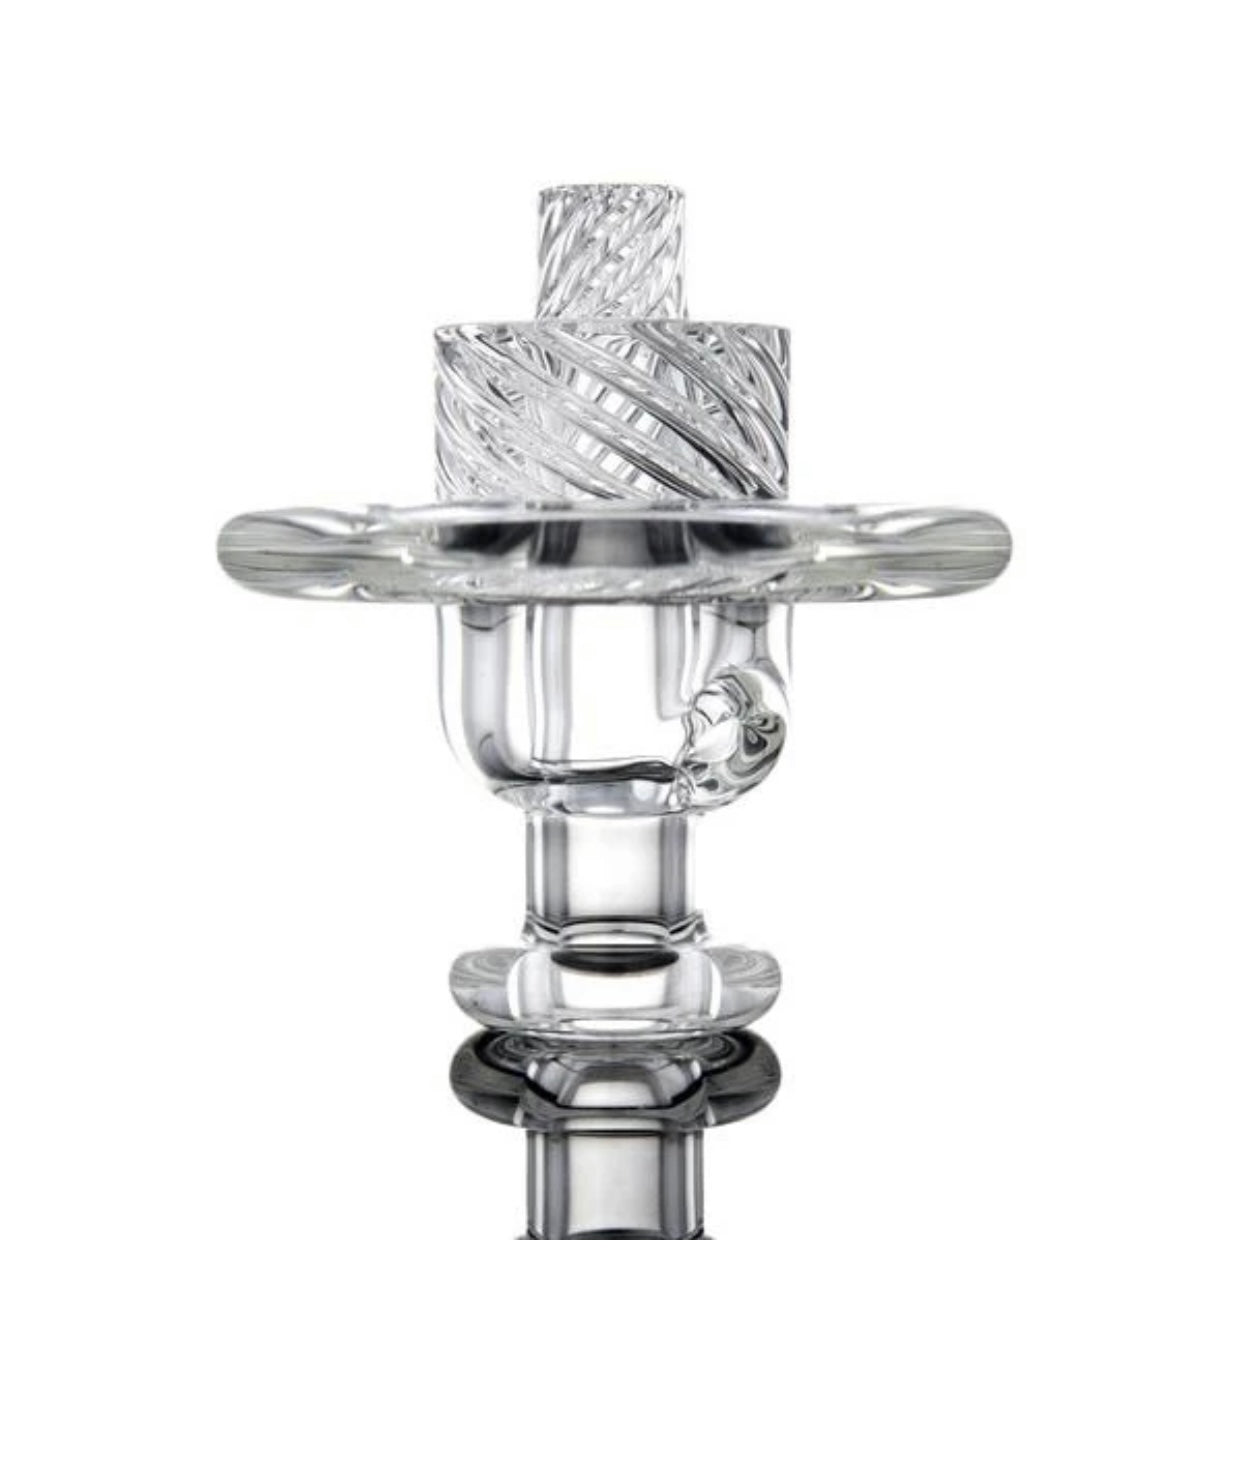 Gordo Scientific CROSSCURRENTS Carb Cap Clear - TheSmokeyMcPotz Collection 